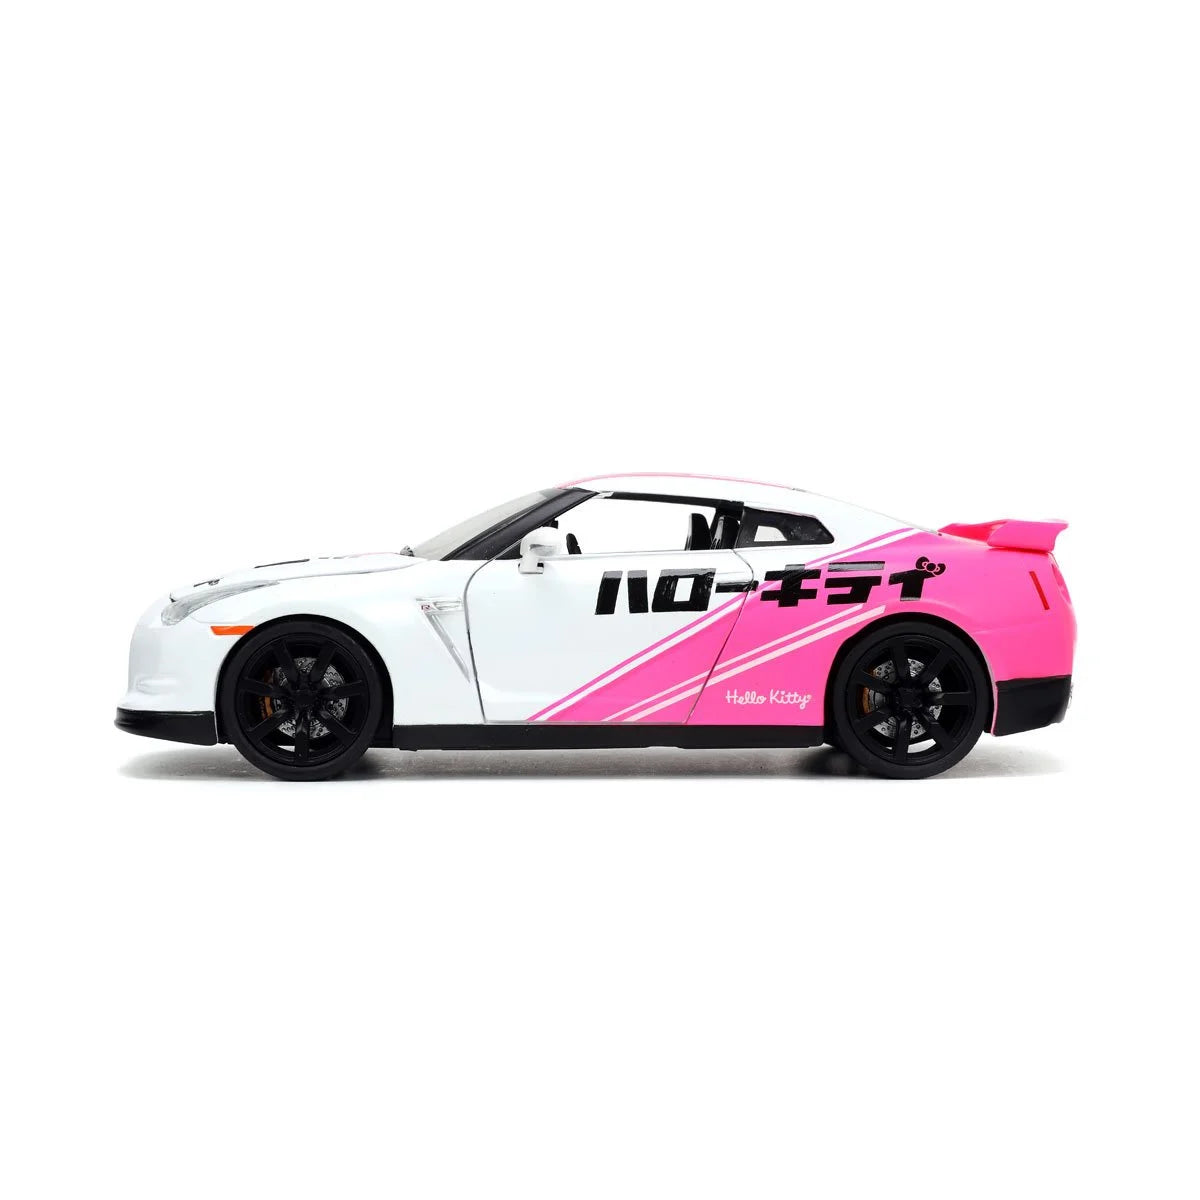 HELLO KITTY TOKYO SPEED 2009 NISSAN GT-R R35 1:24 SCALE DIE-CAST METAL VEHICLE WITH FIGURE